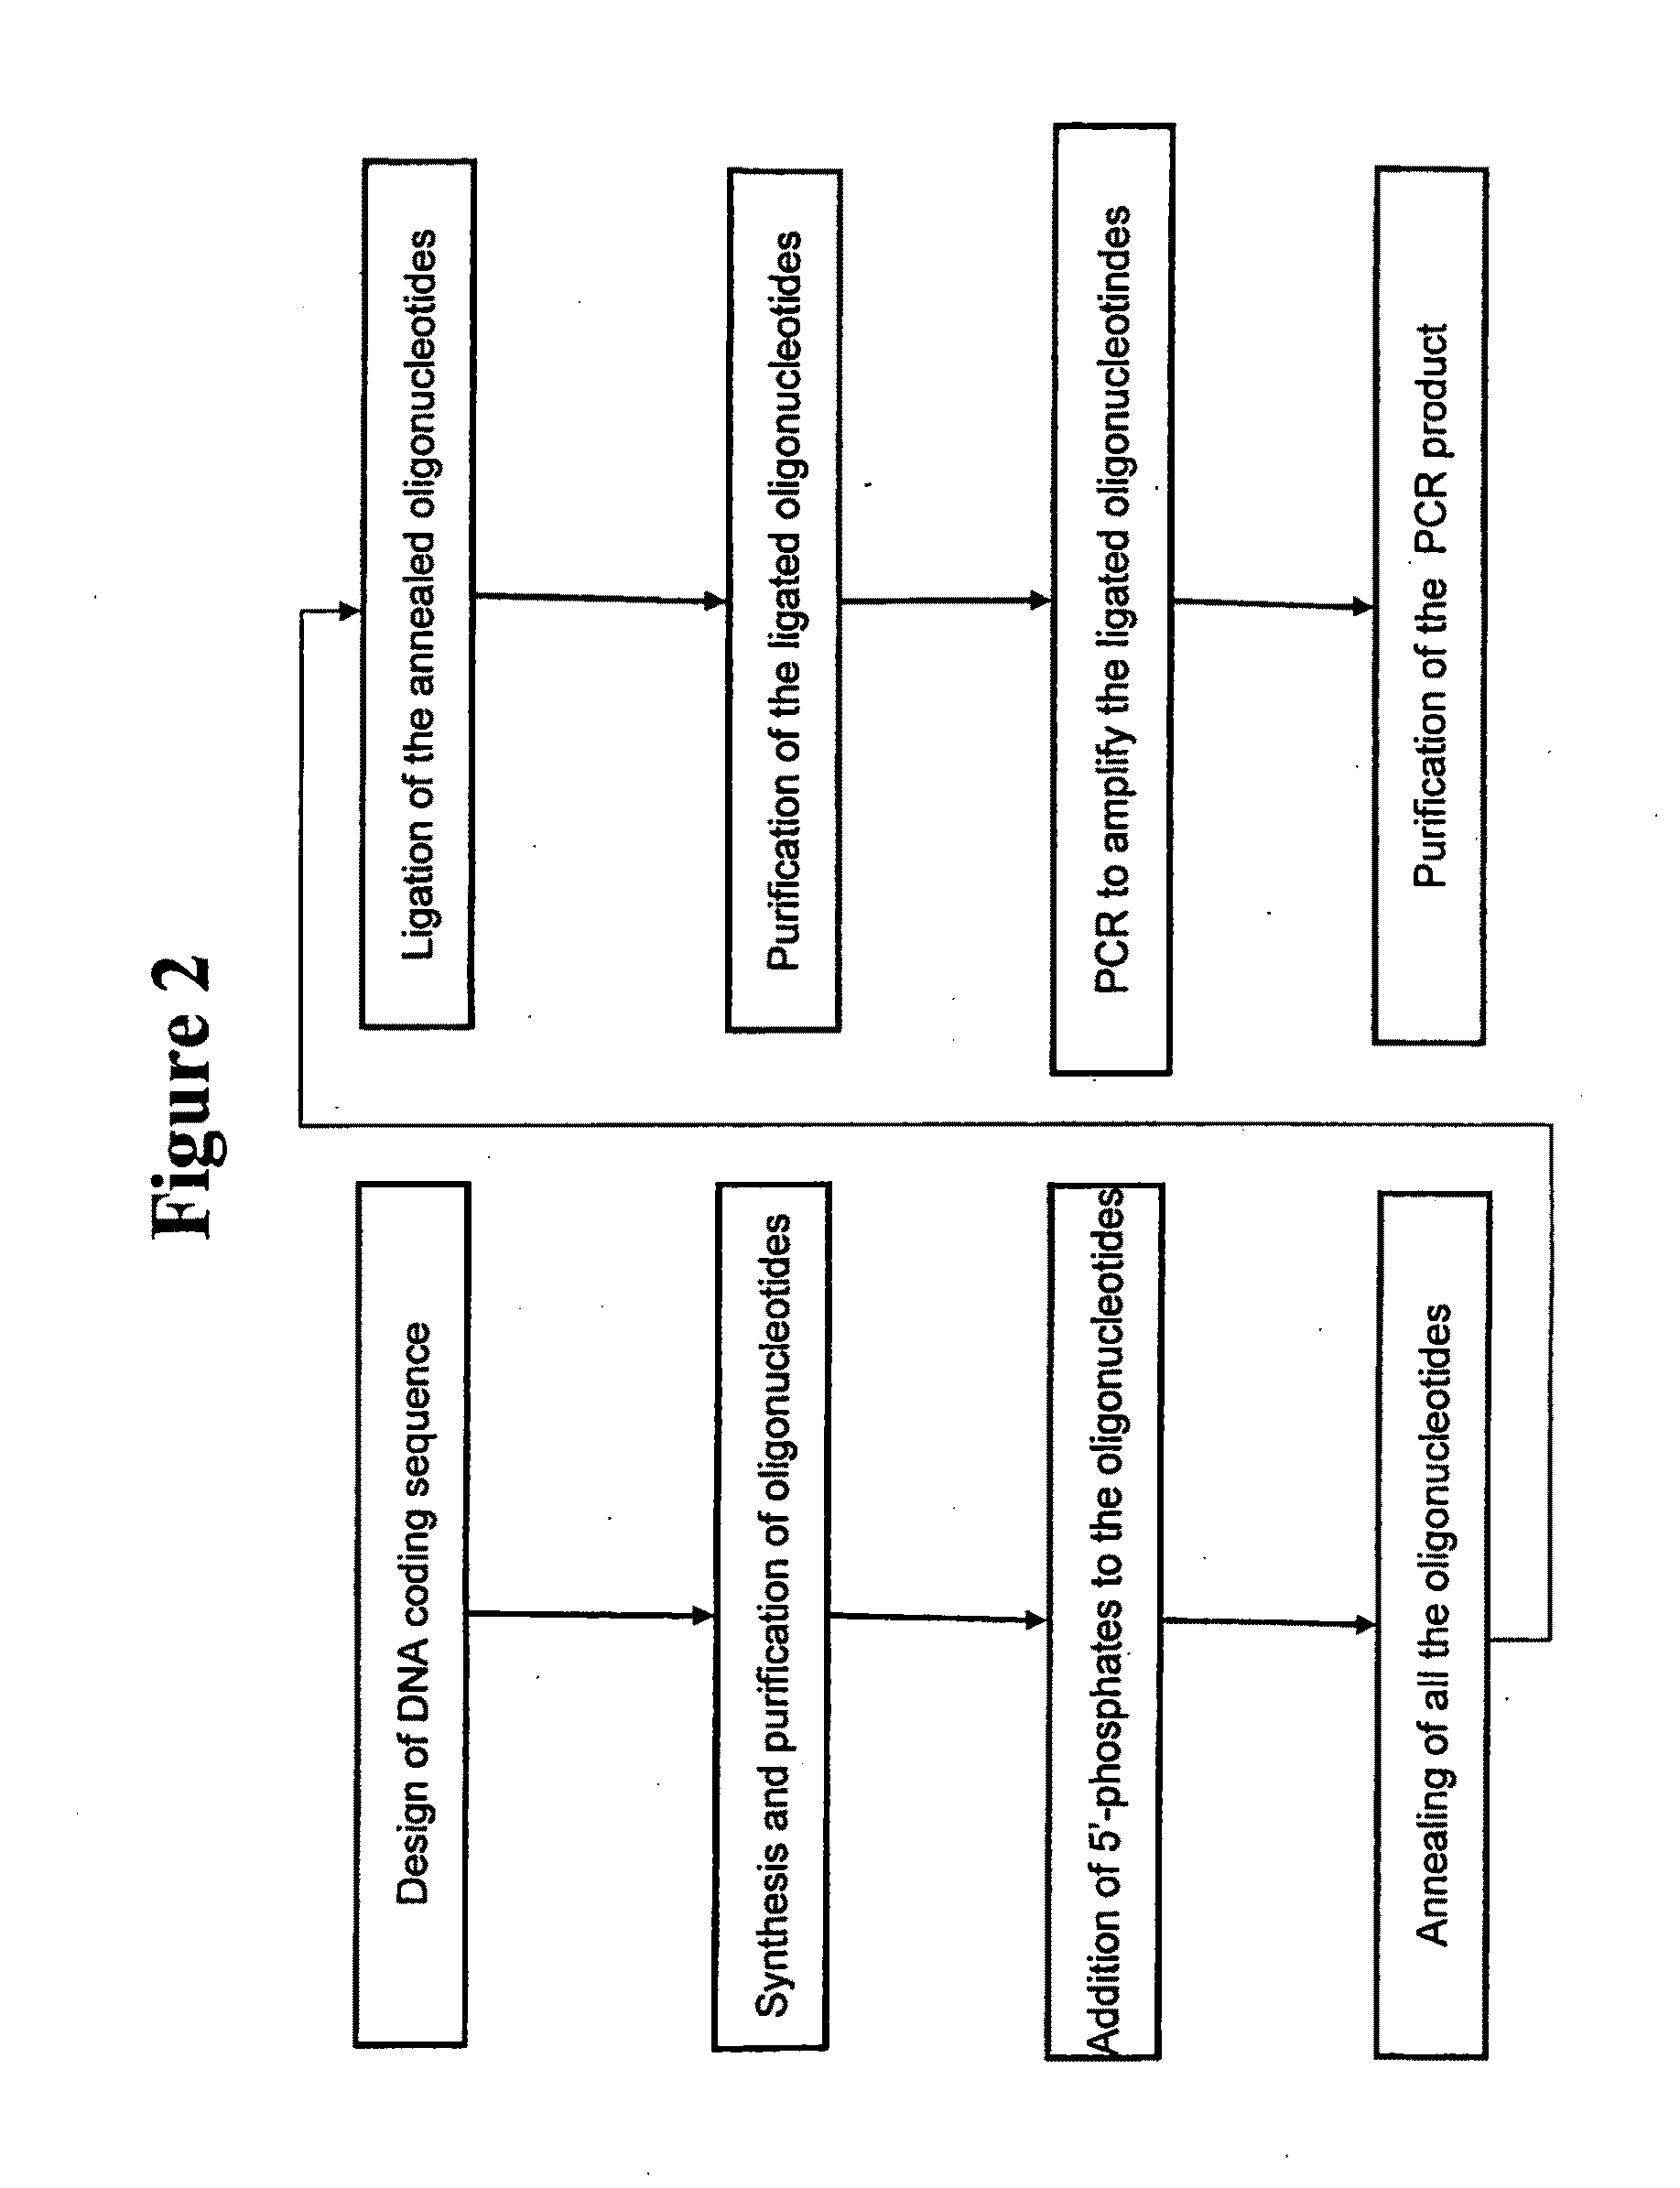 Griffithsin, glycosylation-resistant griffithsin, and related conjugates, compositions, nucleic acids, vectors, host cells, methods of production and methods of use